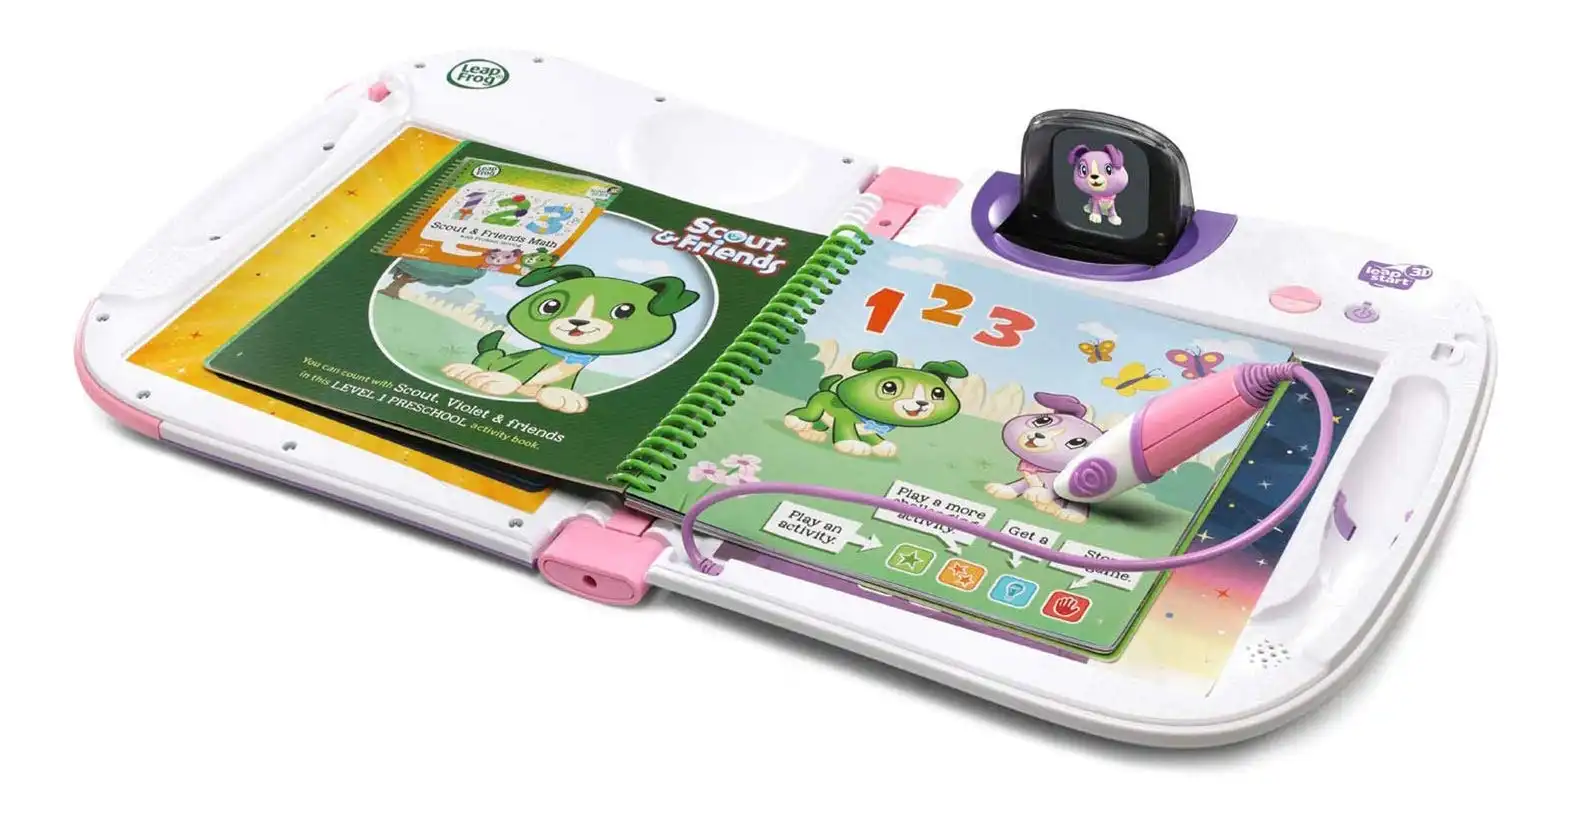 LeapFrog Leapstart 3D Interactive Learning System (Pink)